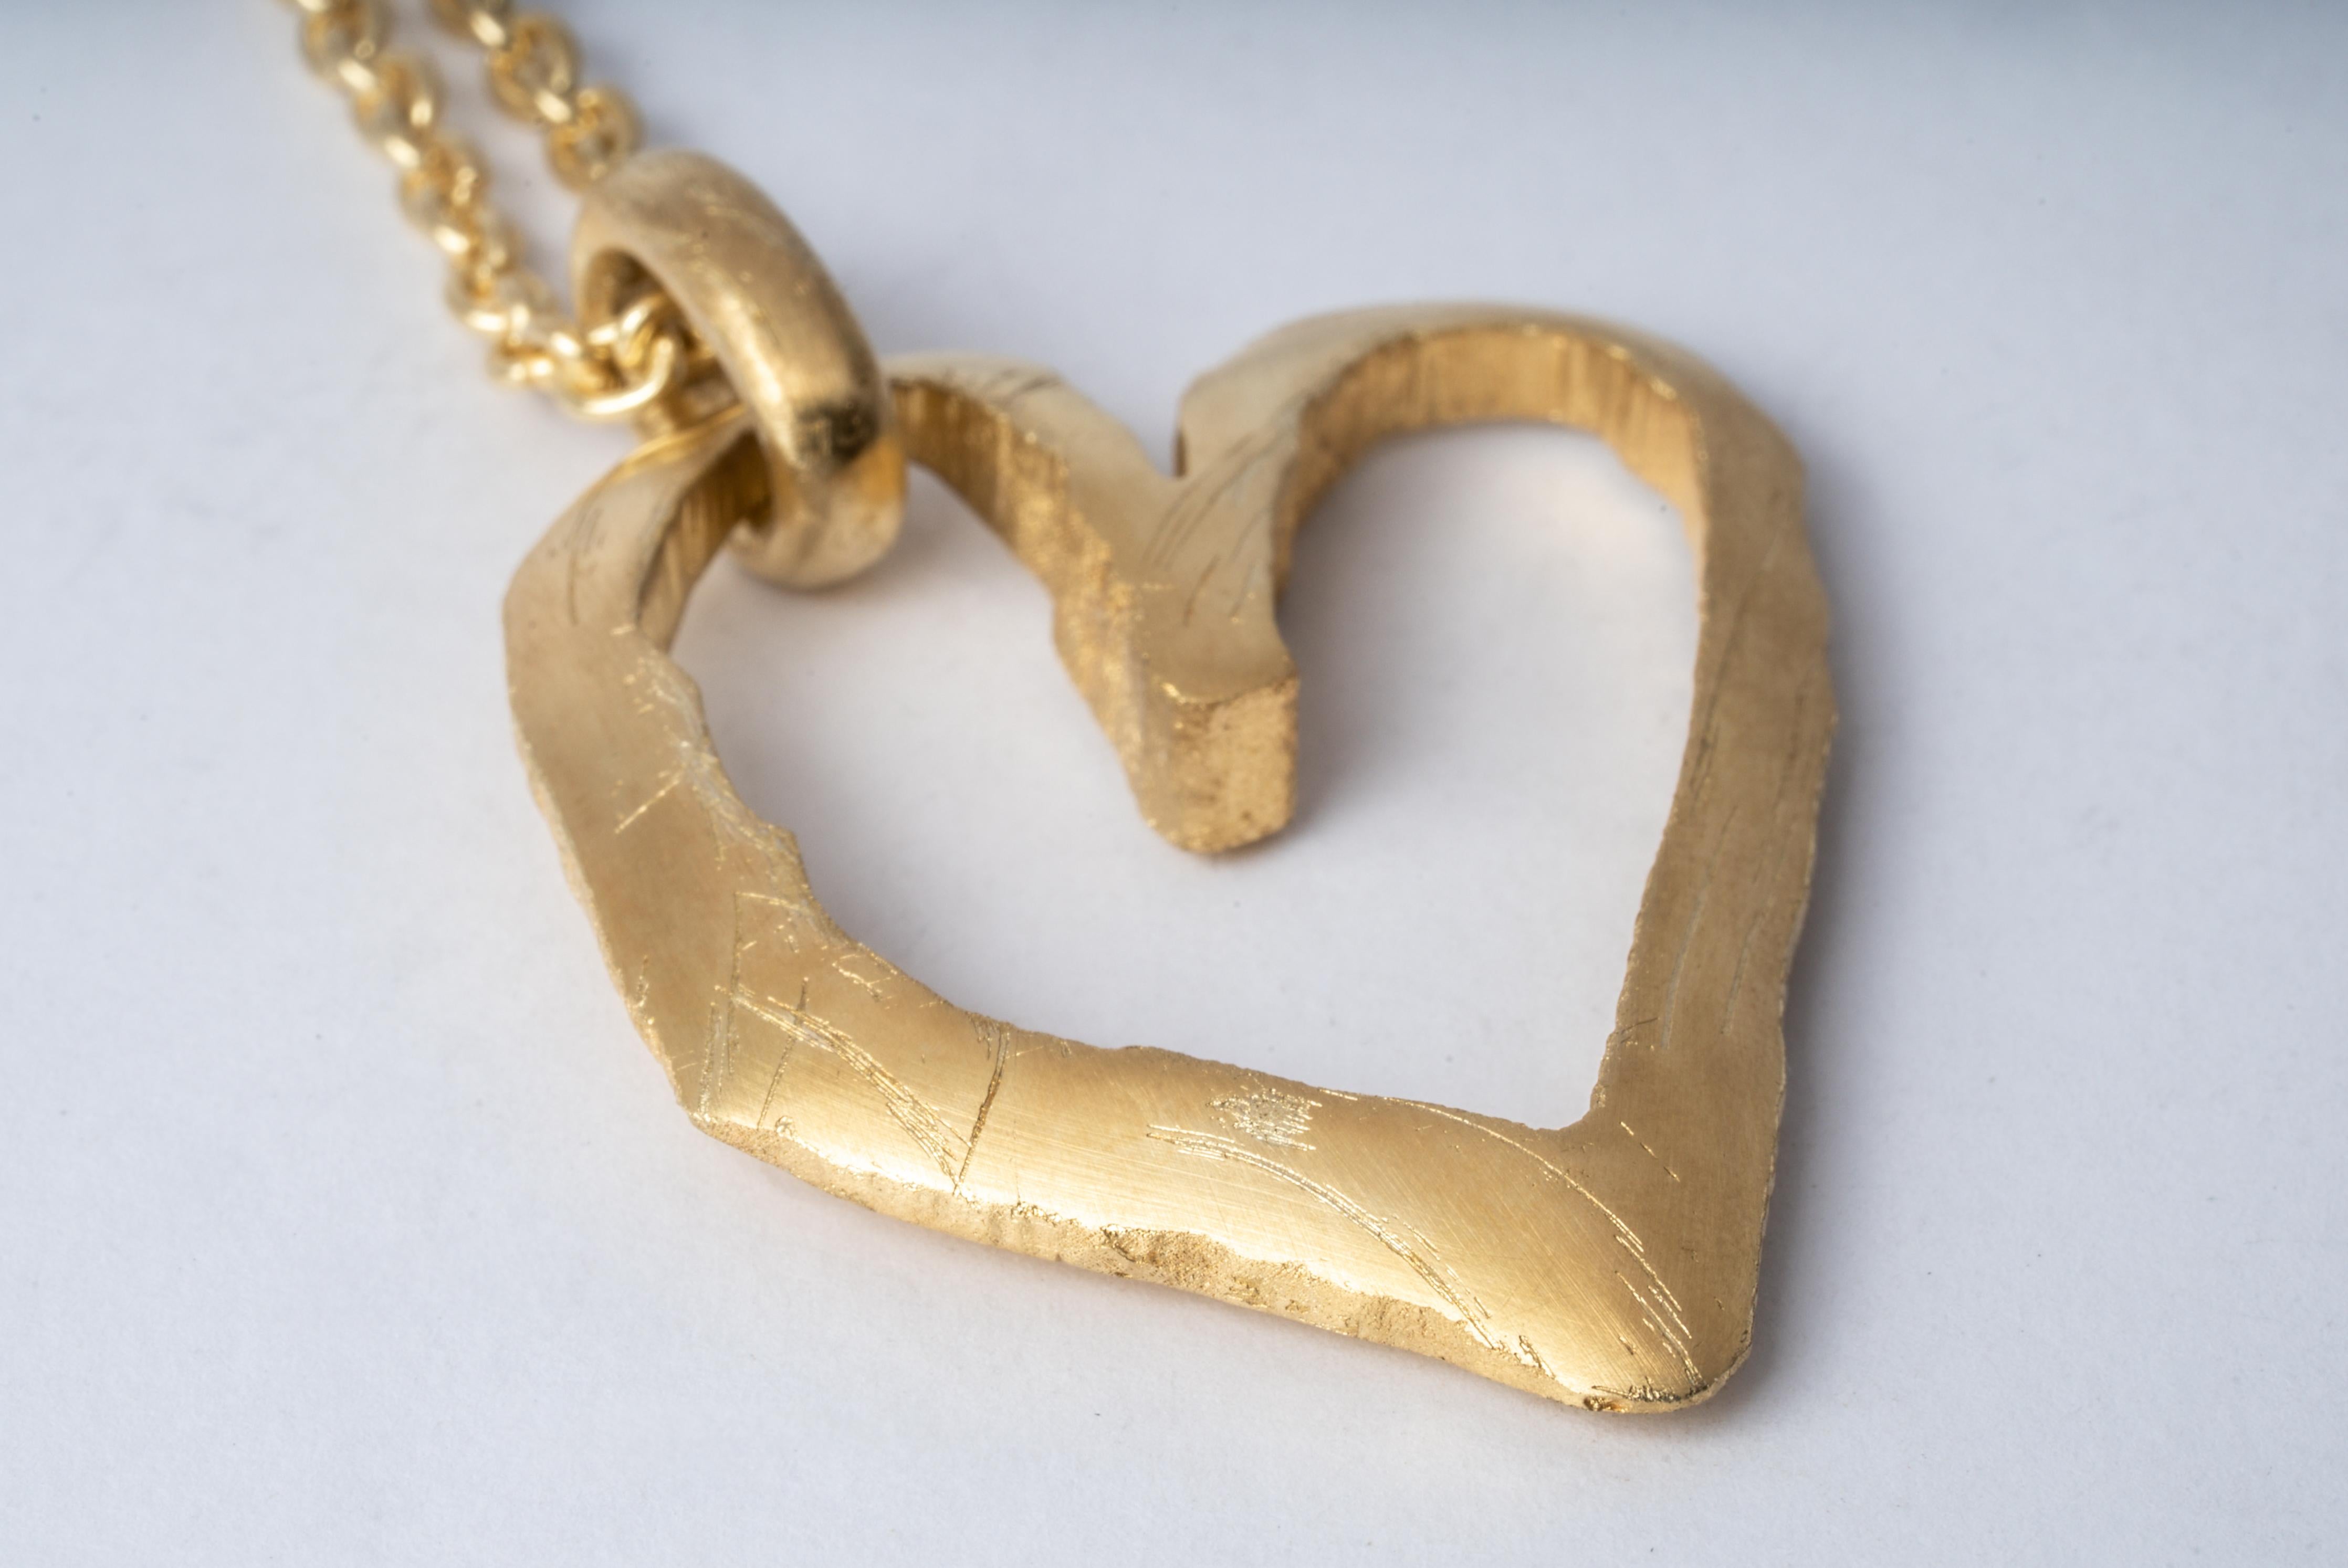 Jazz's Heart Necklace in brass and sterling silver with 18k rose gold then dipped into acid. This series is based on a heart that Jazz, Evan’s daughter, drew directly on his chest when she was five years old. That day they went and had it tattooed